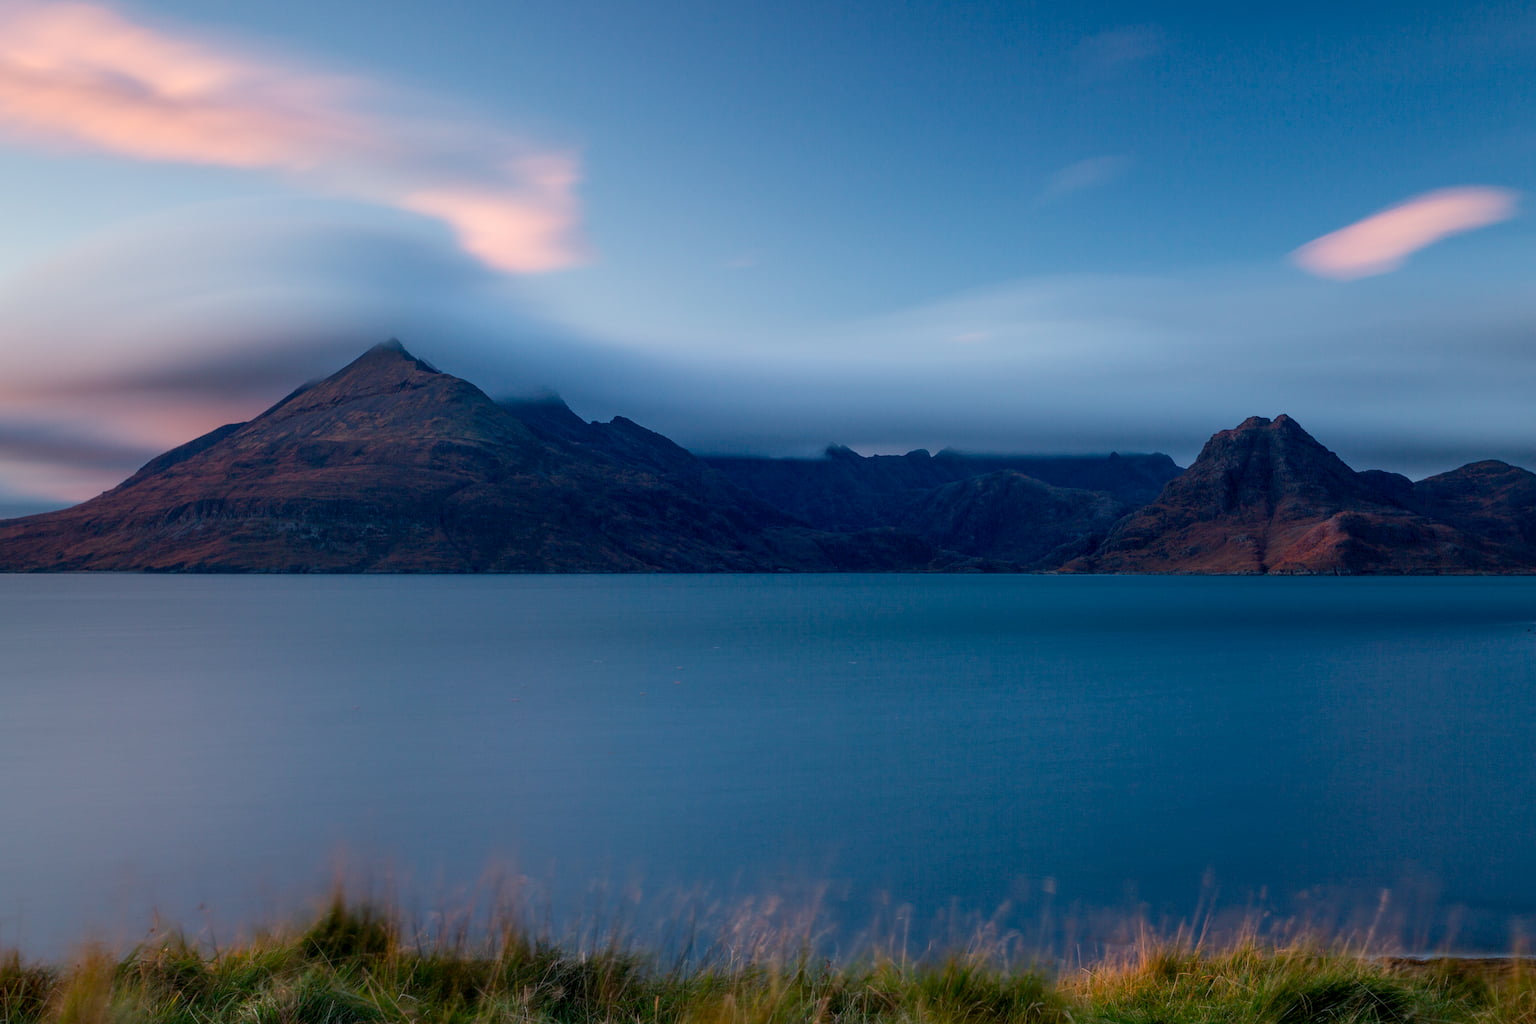 Long exposure photograph of The Cuillin mountains taken from Elgol over looking Loch Scavaig on the Isle of Skye, Scotland. 